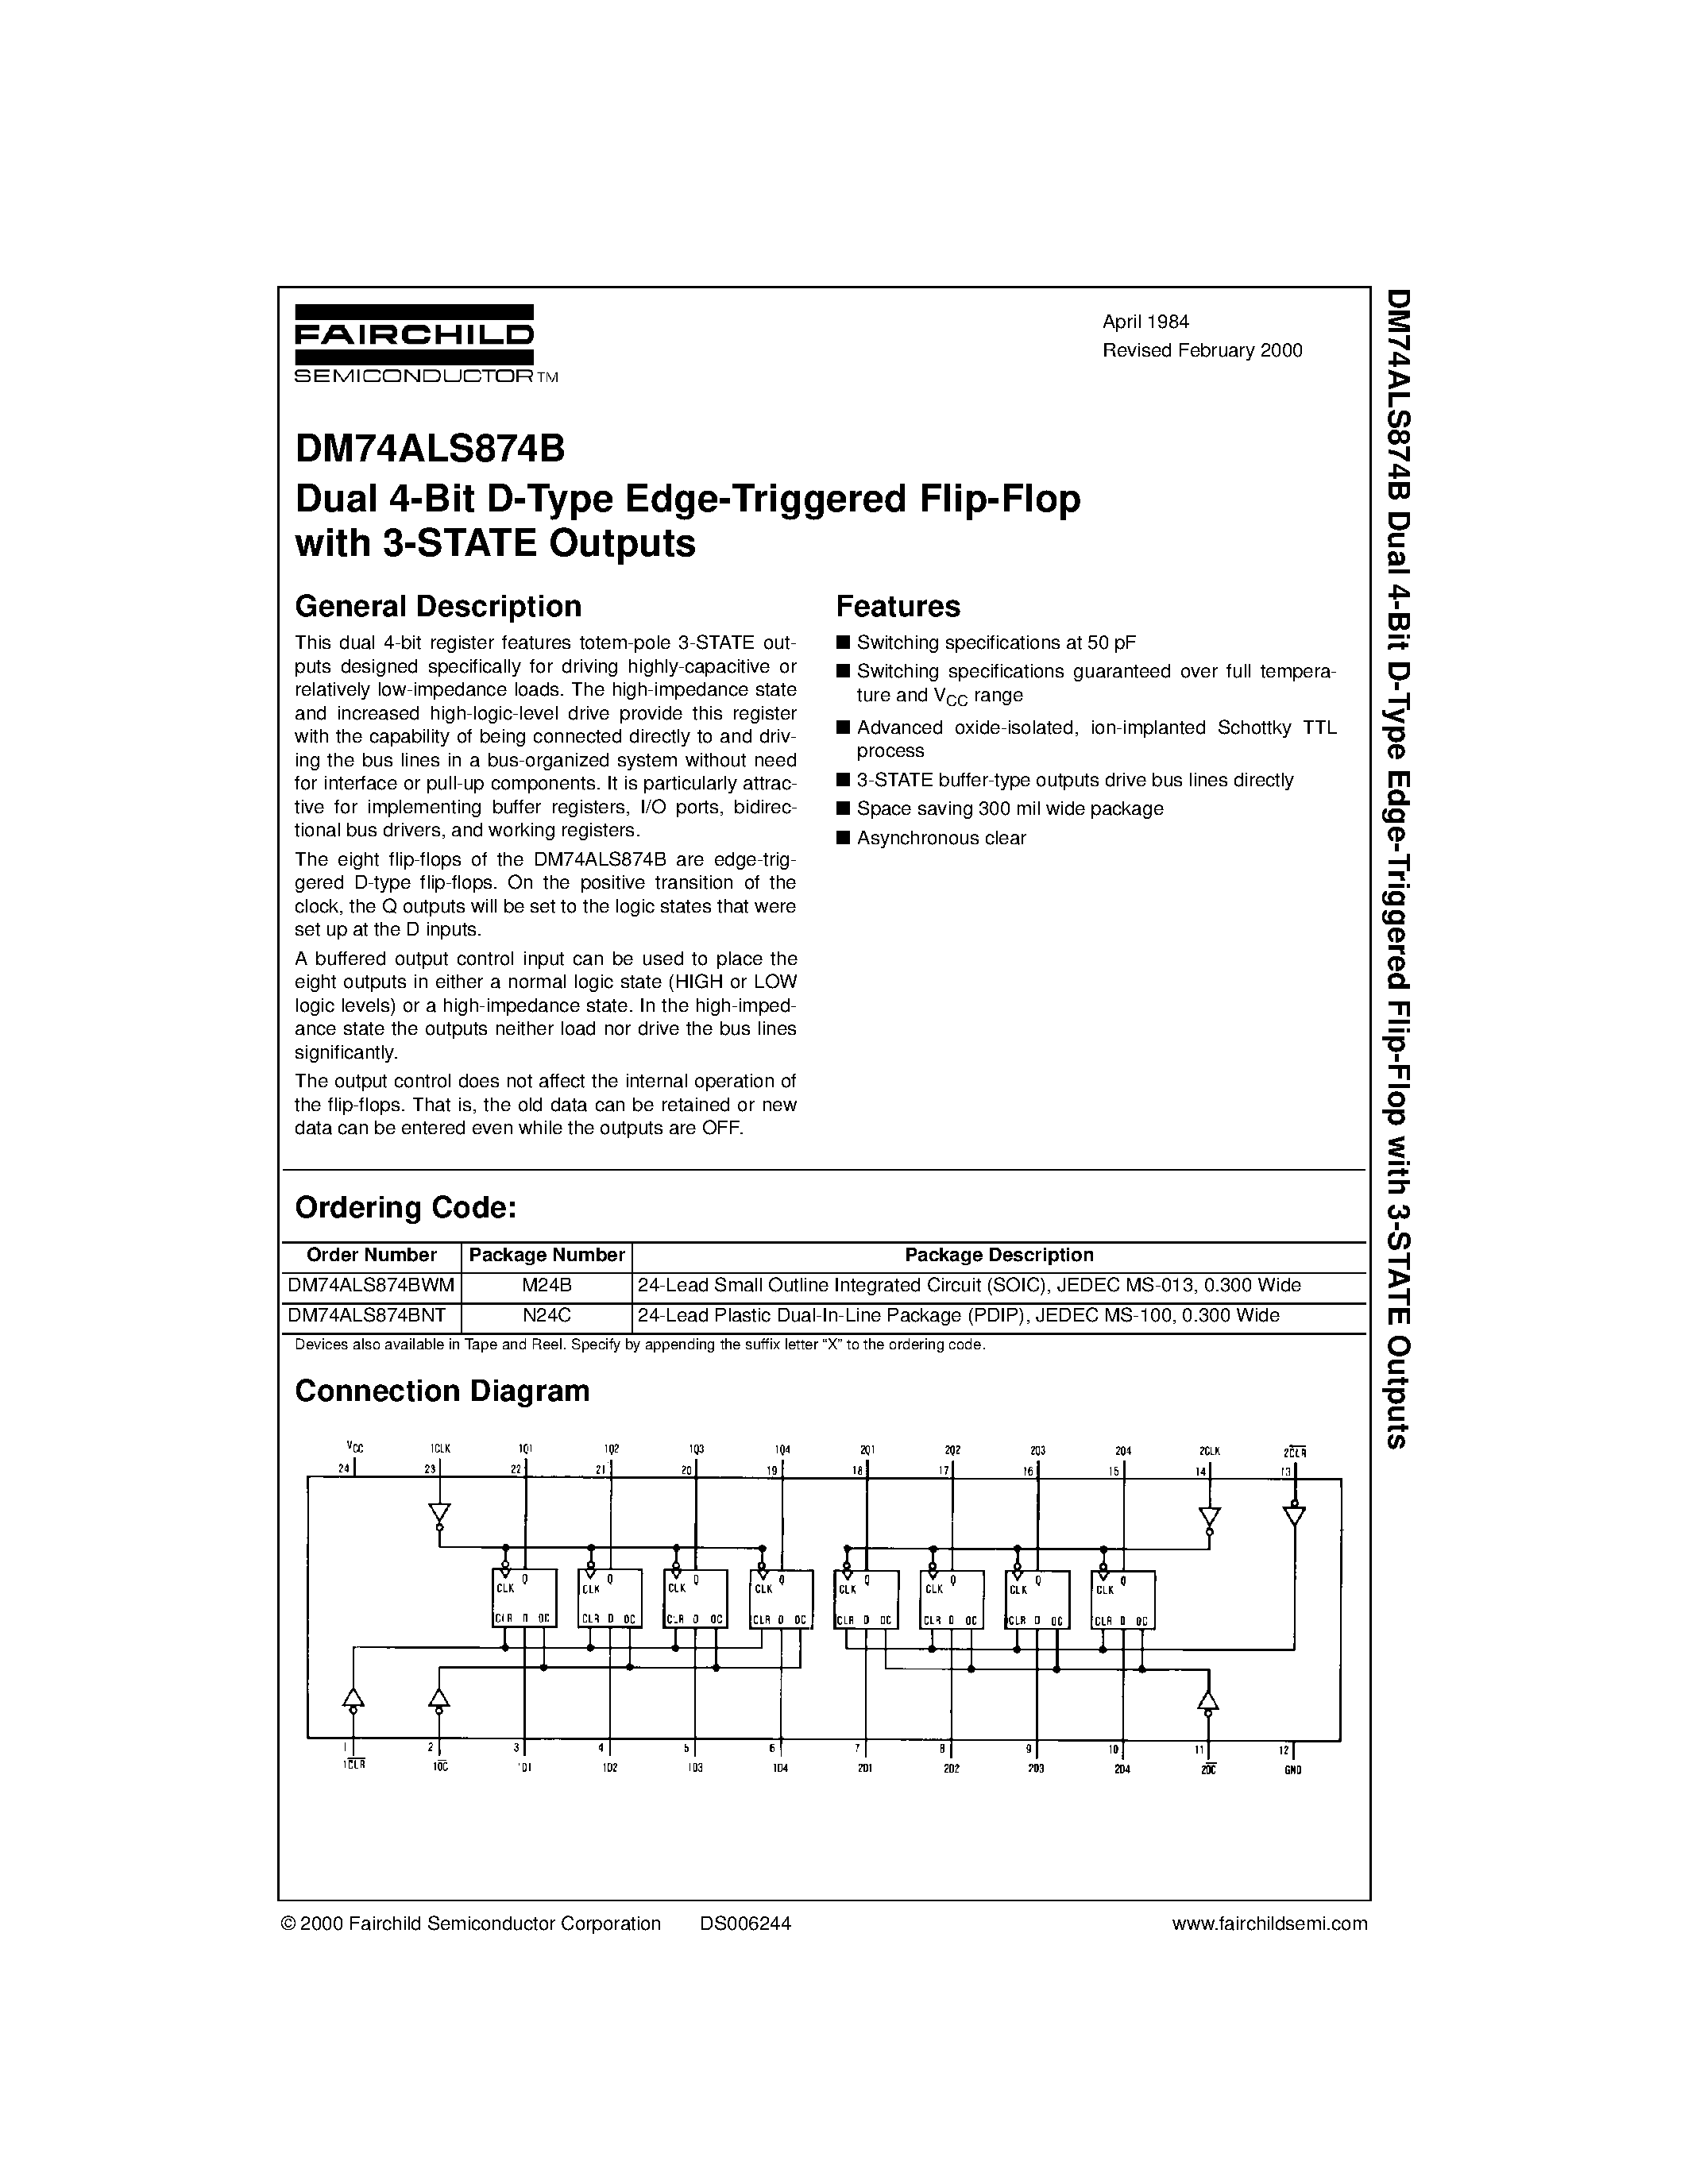 Datasheet DM74ALS874BWM - Dual 4-Bit D-Type Edge-Triggered Flip-Flop with 3-STATE Outputs page 1